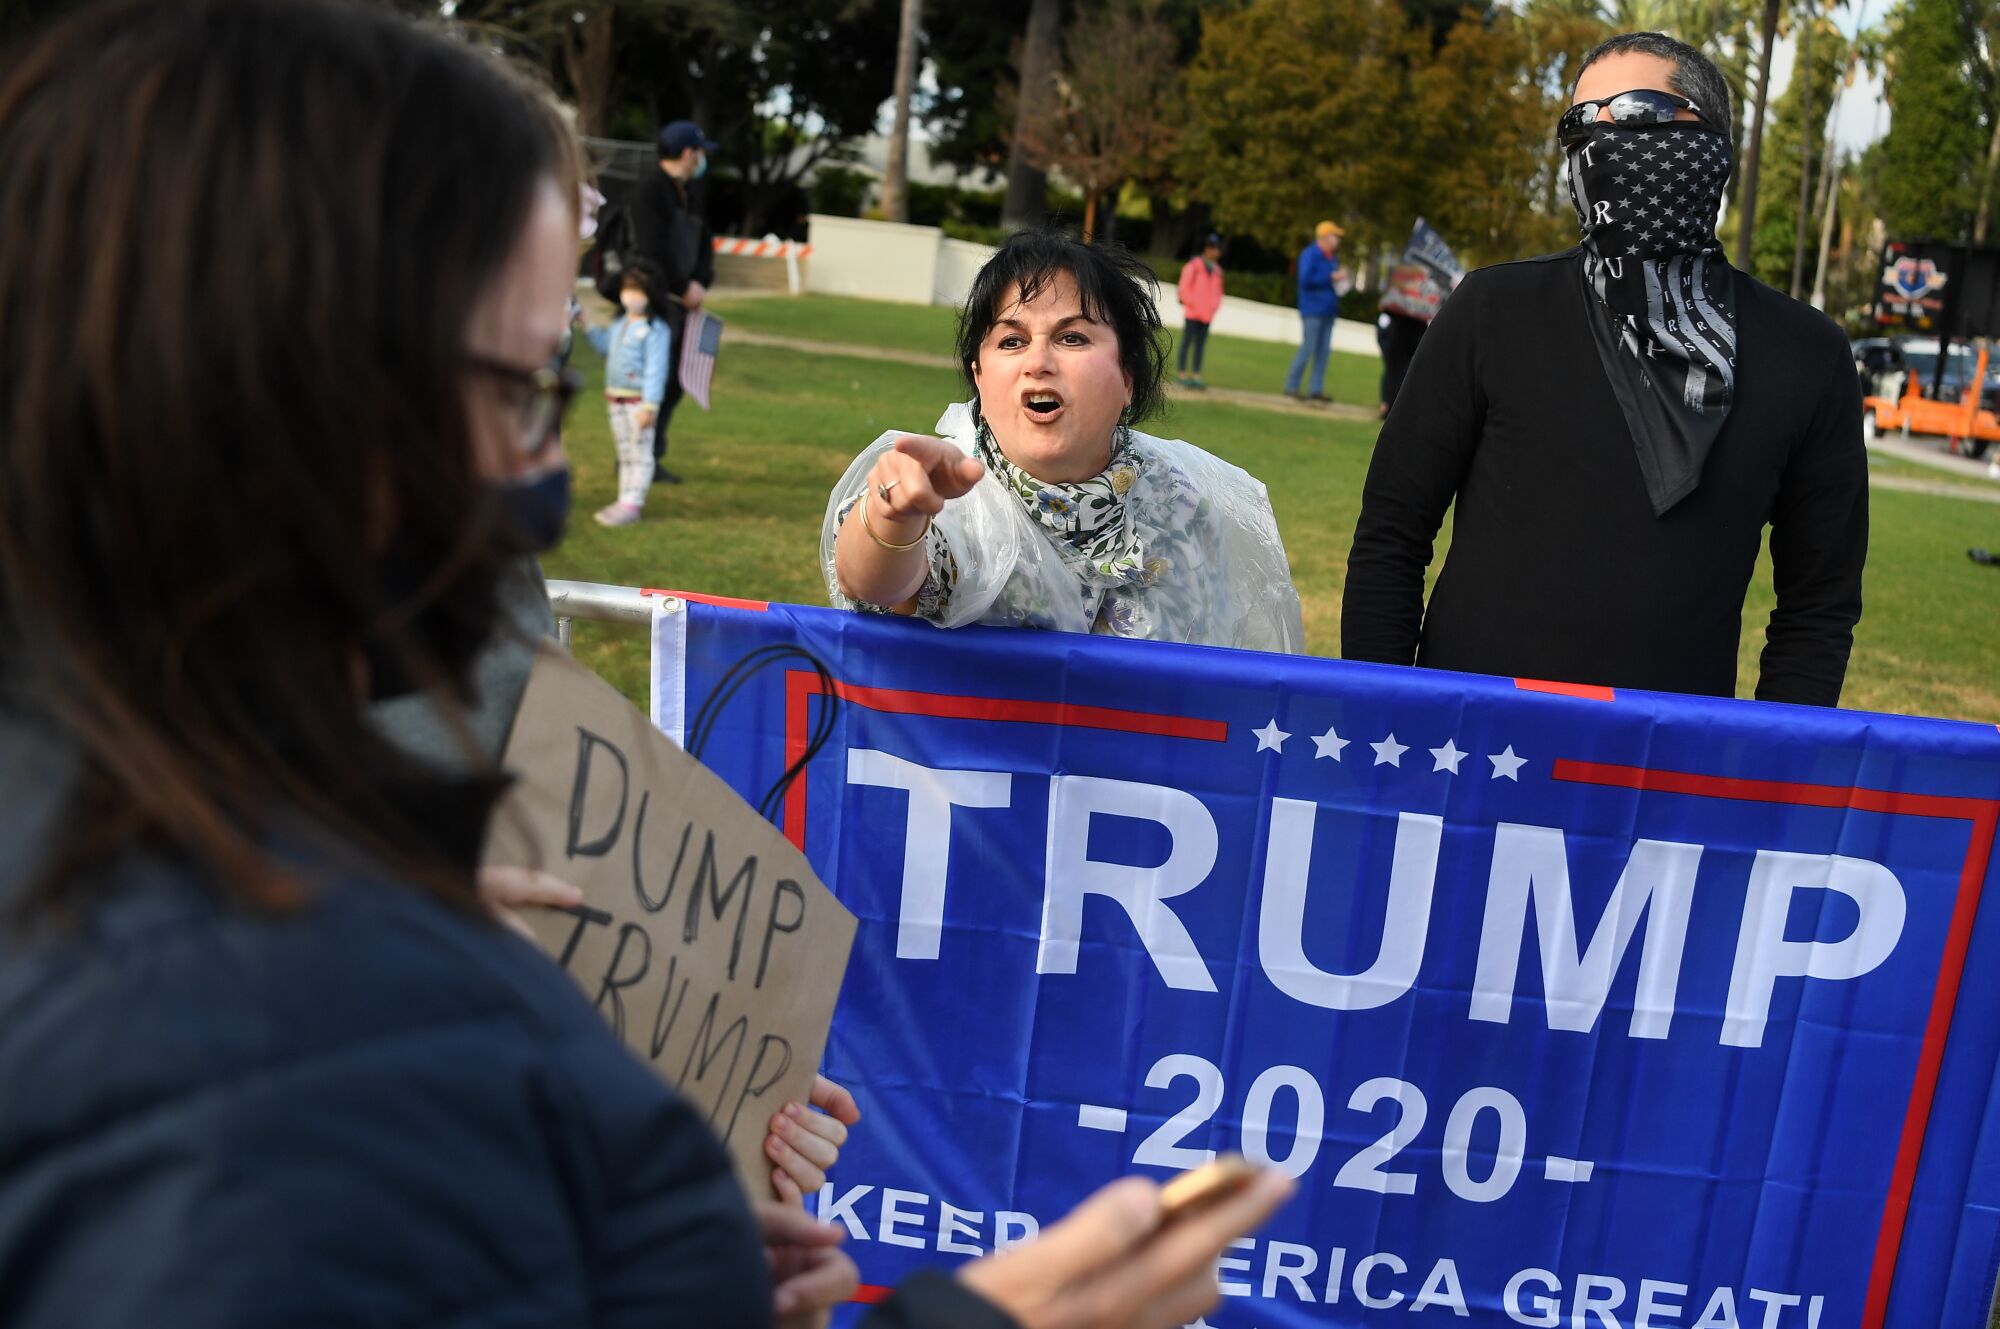 A Trump supporter yells at a rival protester during a rally for the president in Beverly Hills on Saturday.